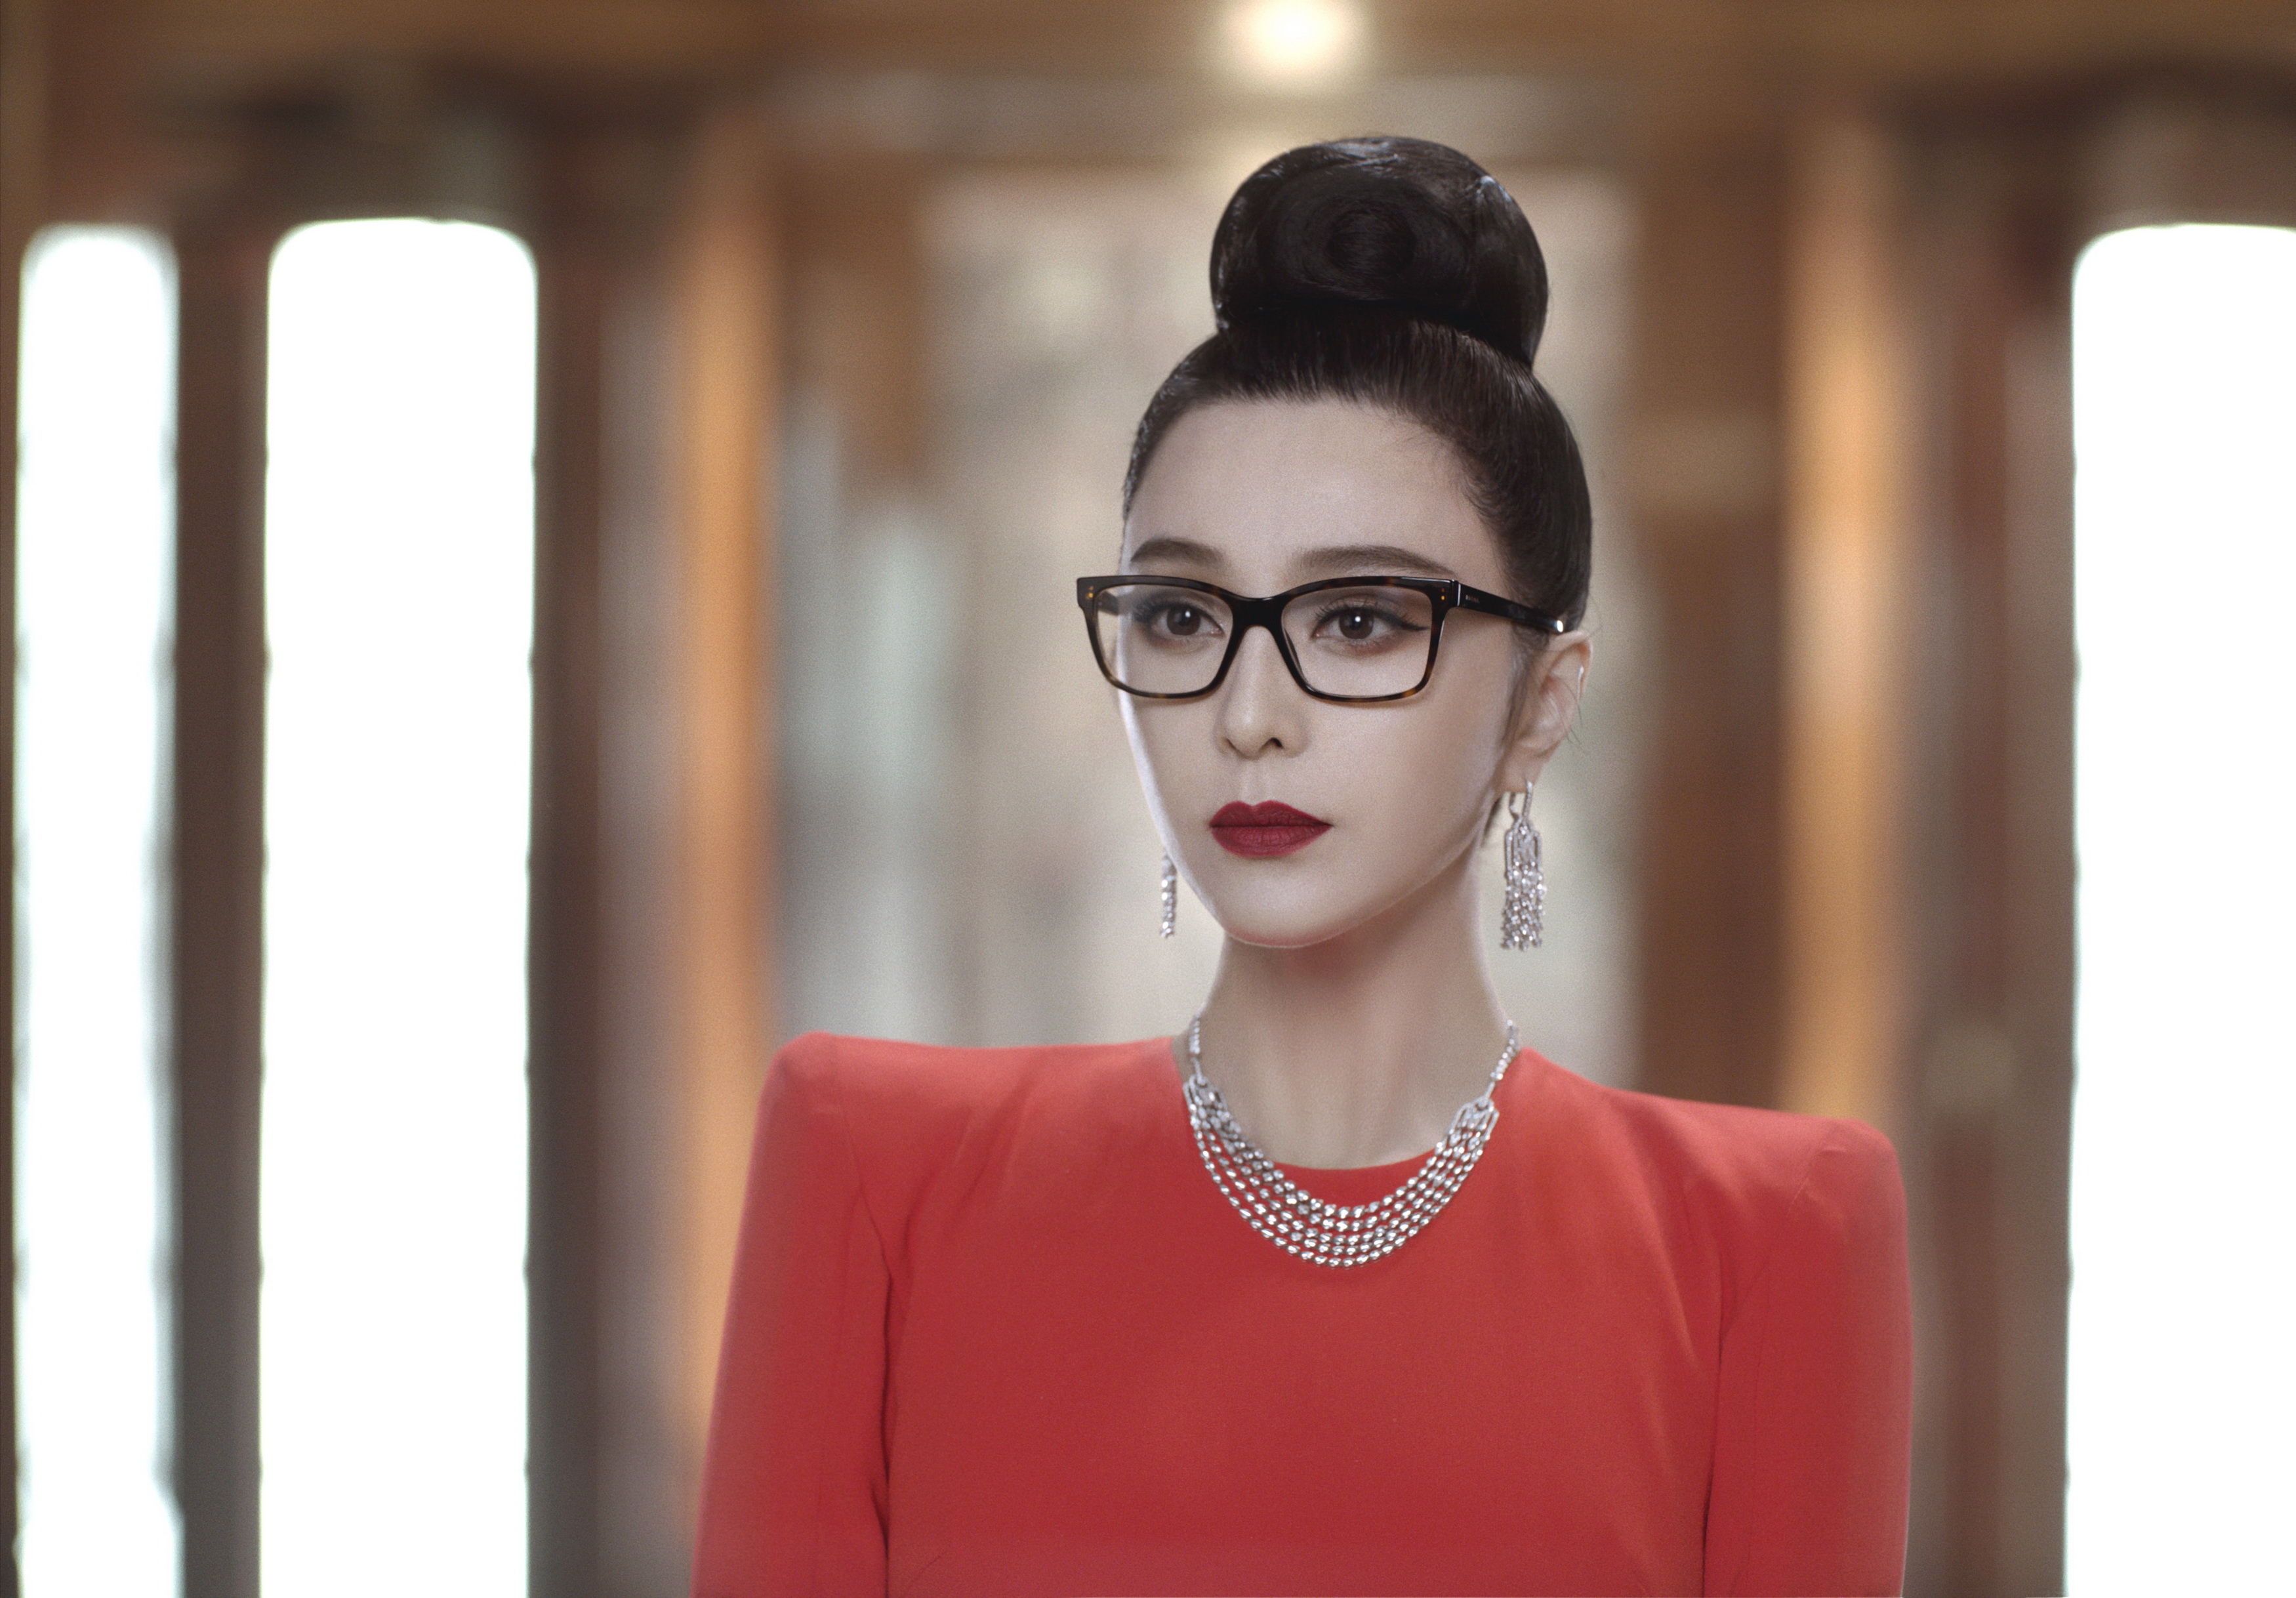 Piaget THE 355 Fan Bingbing as Lin Mi Sheng Piaget Sunny Side of Life earrings and necklace 2 Courtesy of Universal Pictures